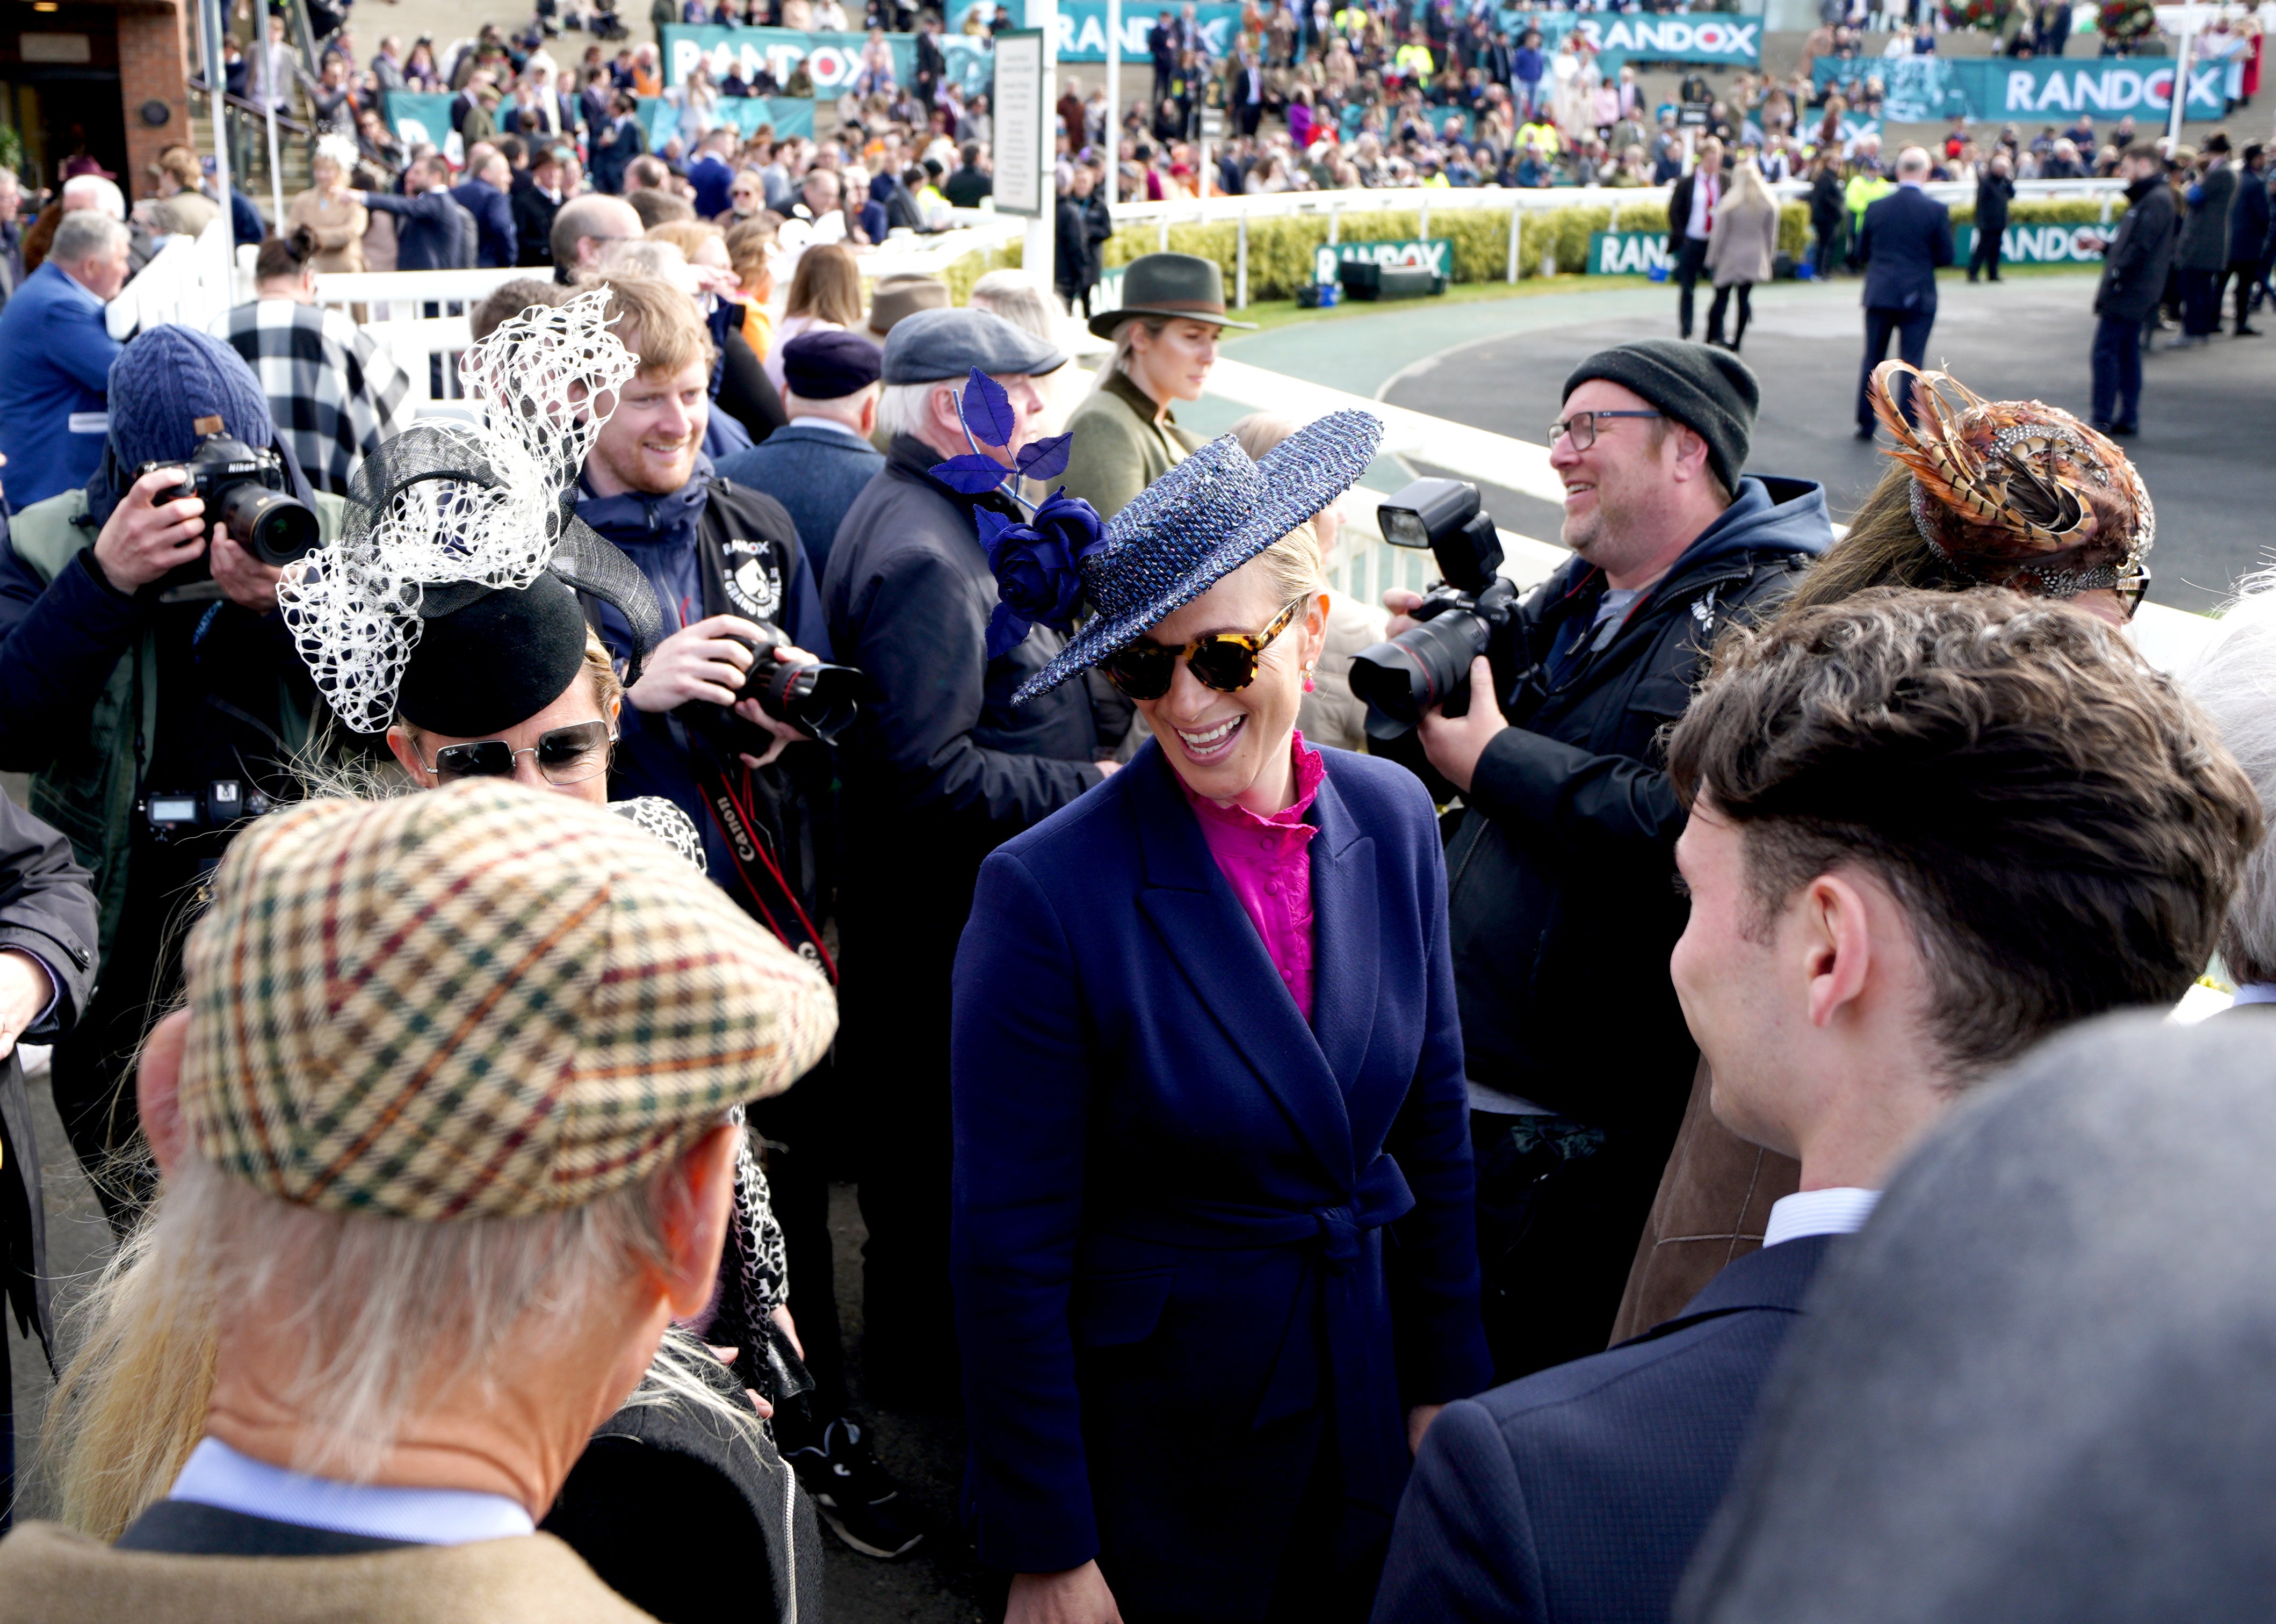 Zara Tindall during Grand National Day of the Randox Health Grand National Festival 2022 (Peter Byrne/PA)